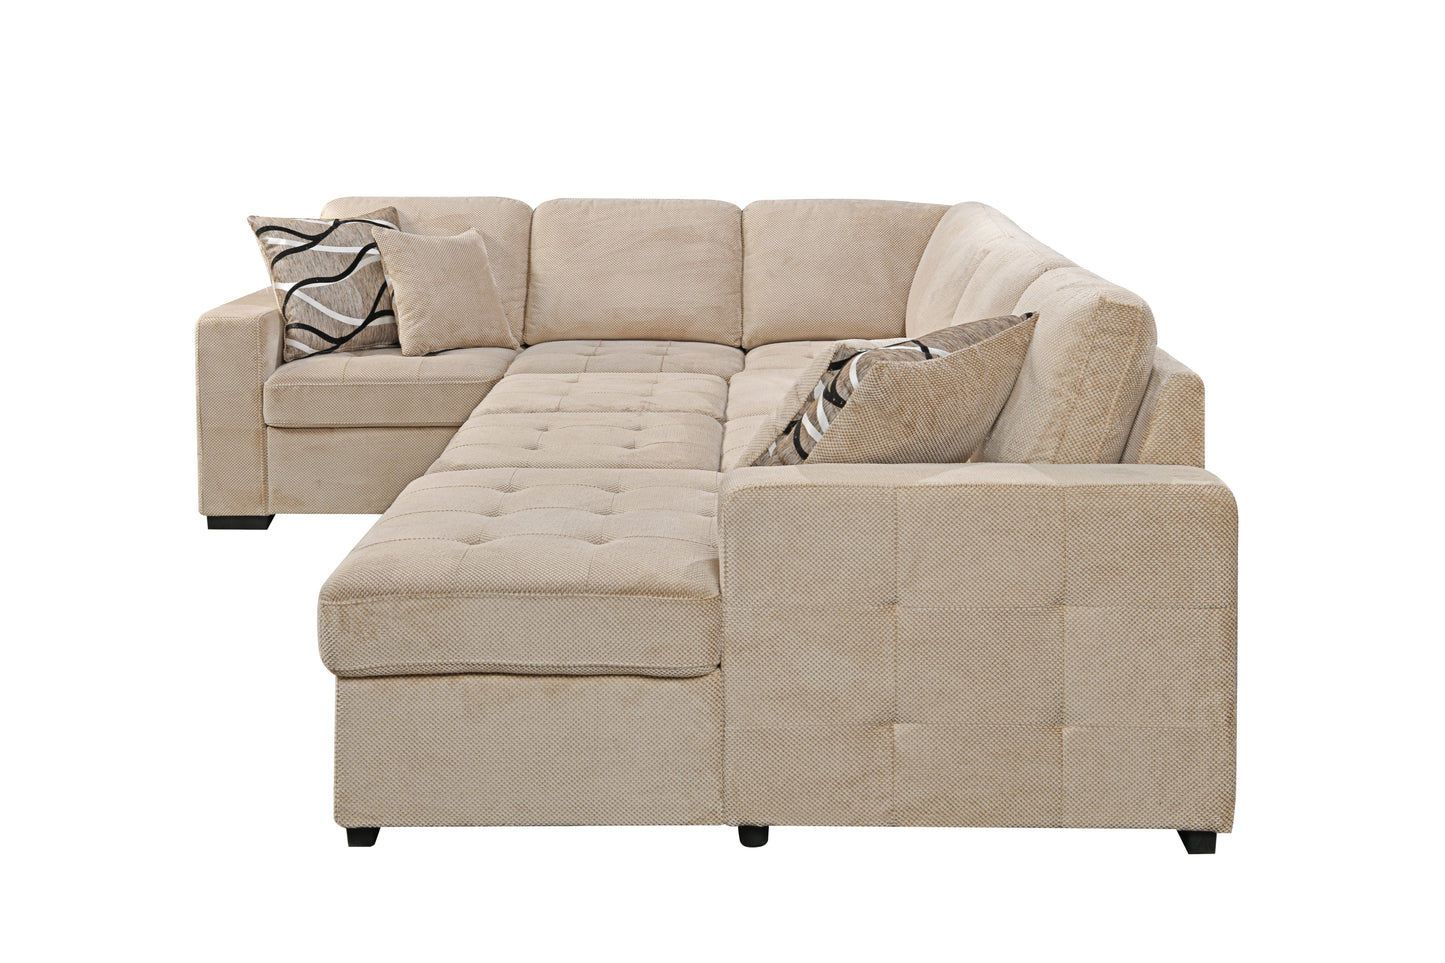 1st Choice 123" Oversized Sectional Sofa with Storage Chaise in Beige